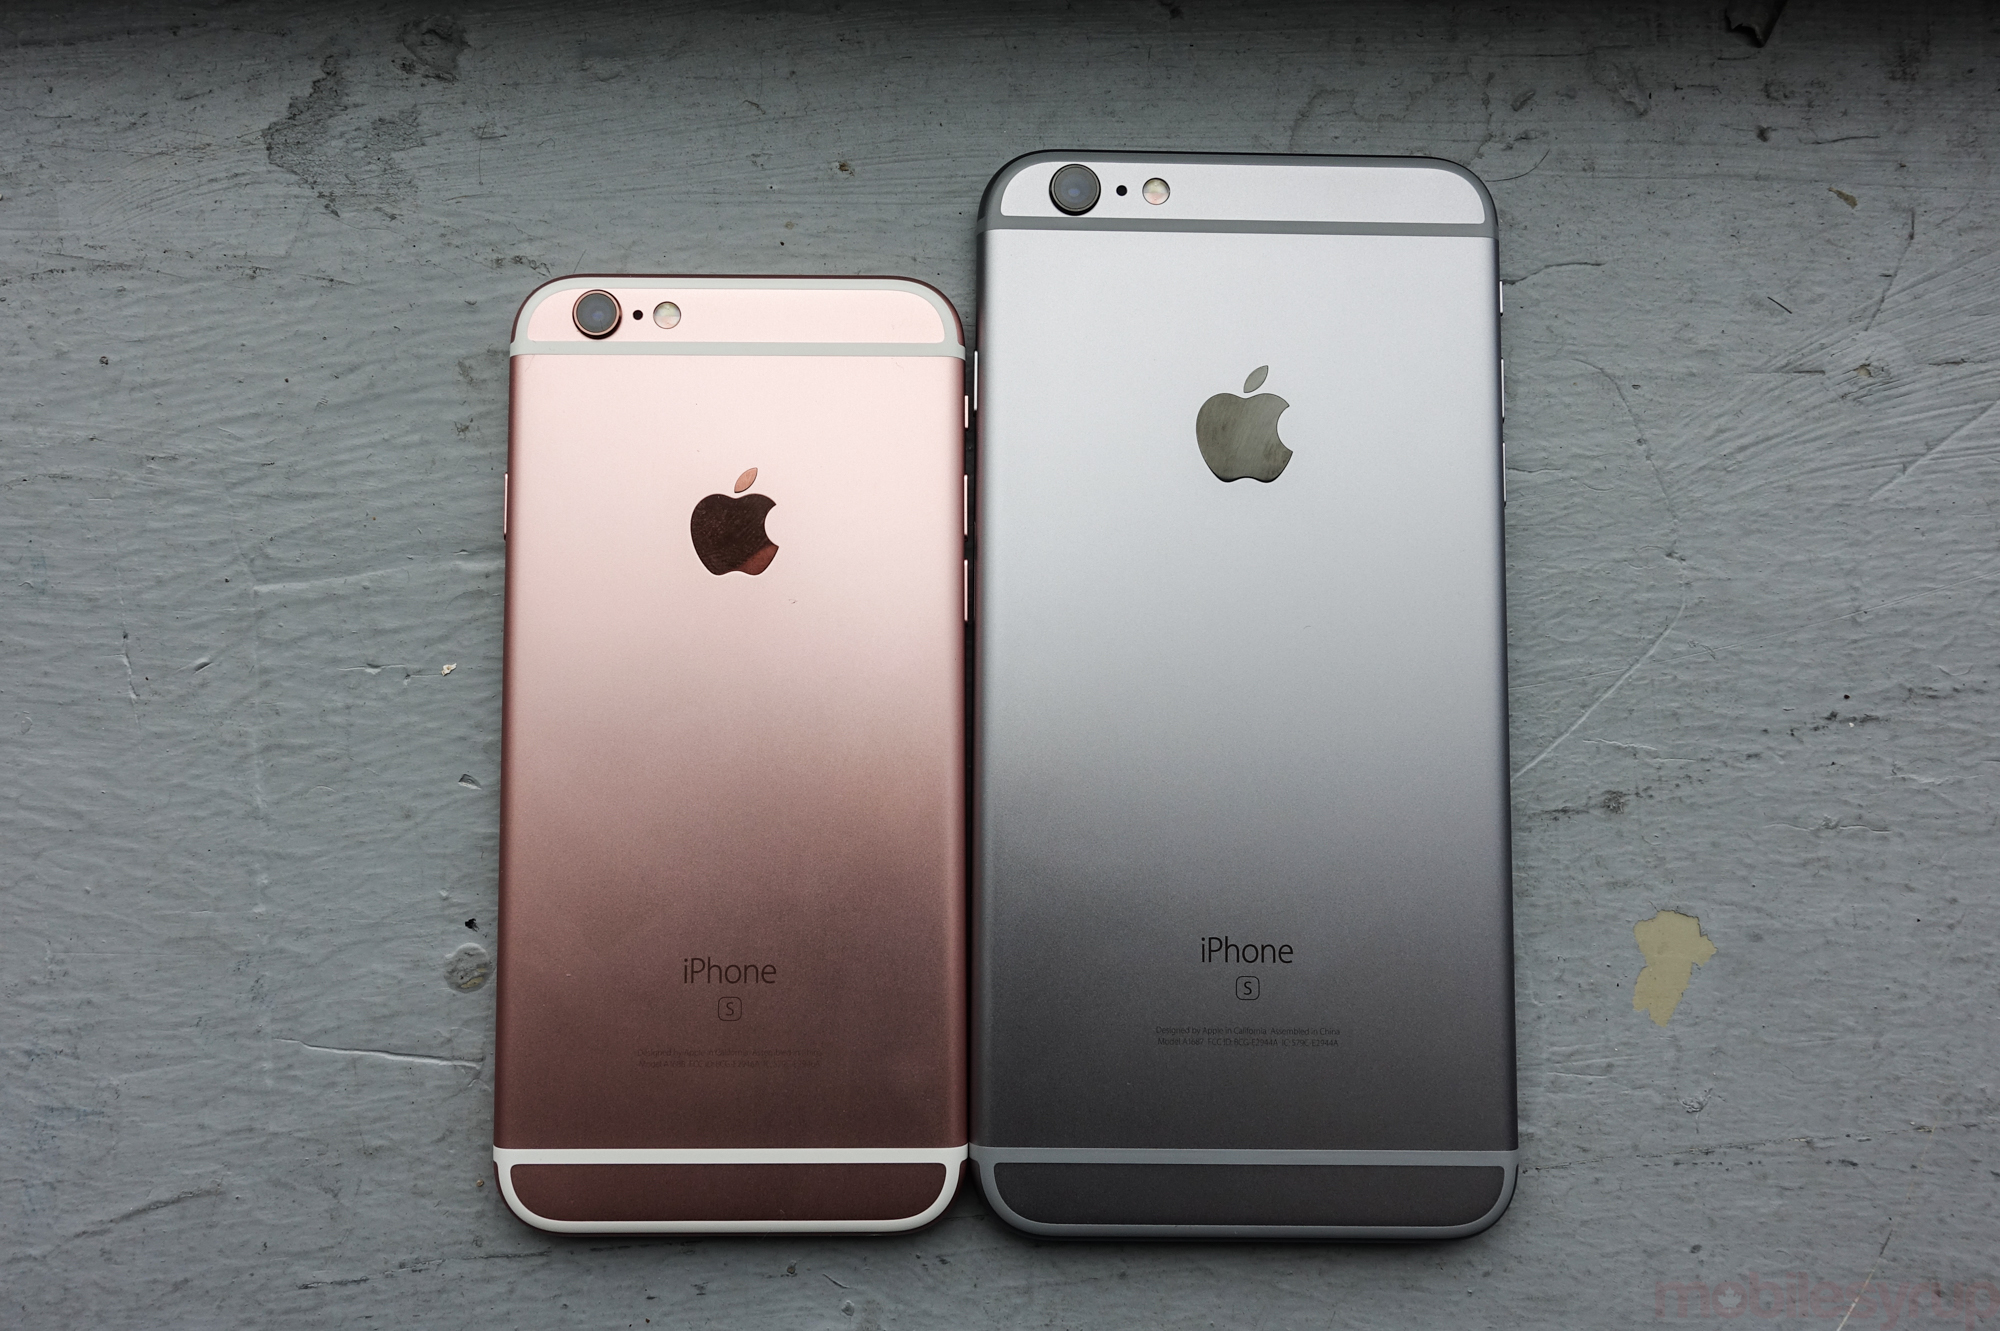 Apple iPhone 6s and iPhone 6s Plus now available in Canada